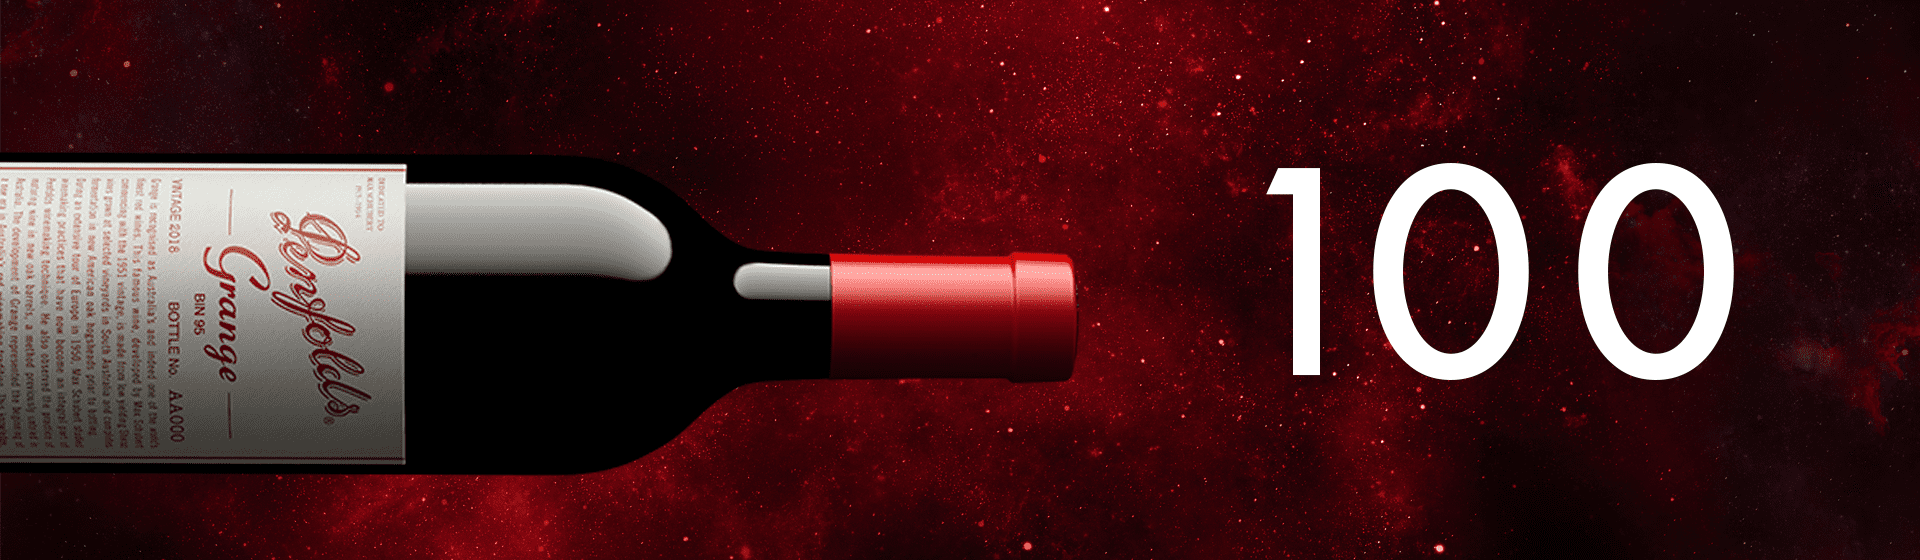 Grange 2018 bottle against red galaxy background with 100 overlaid